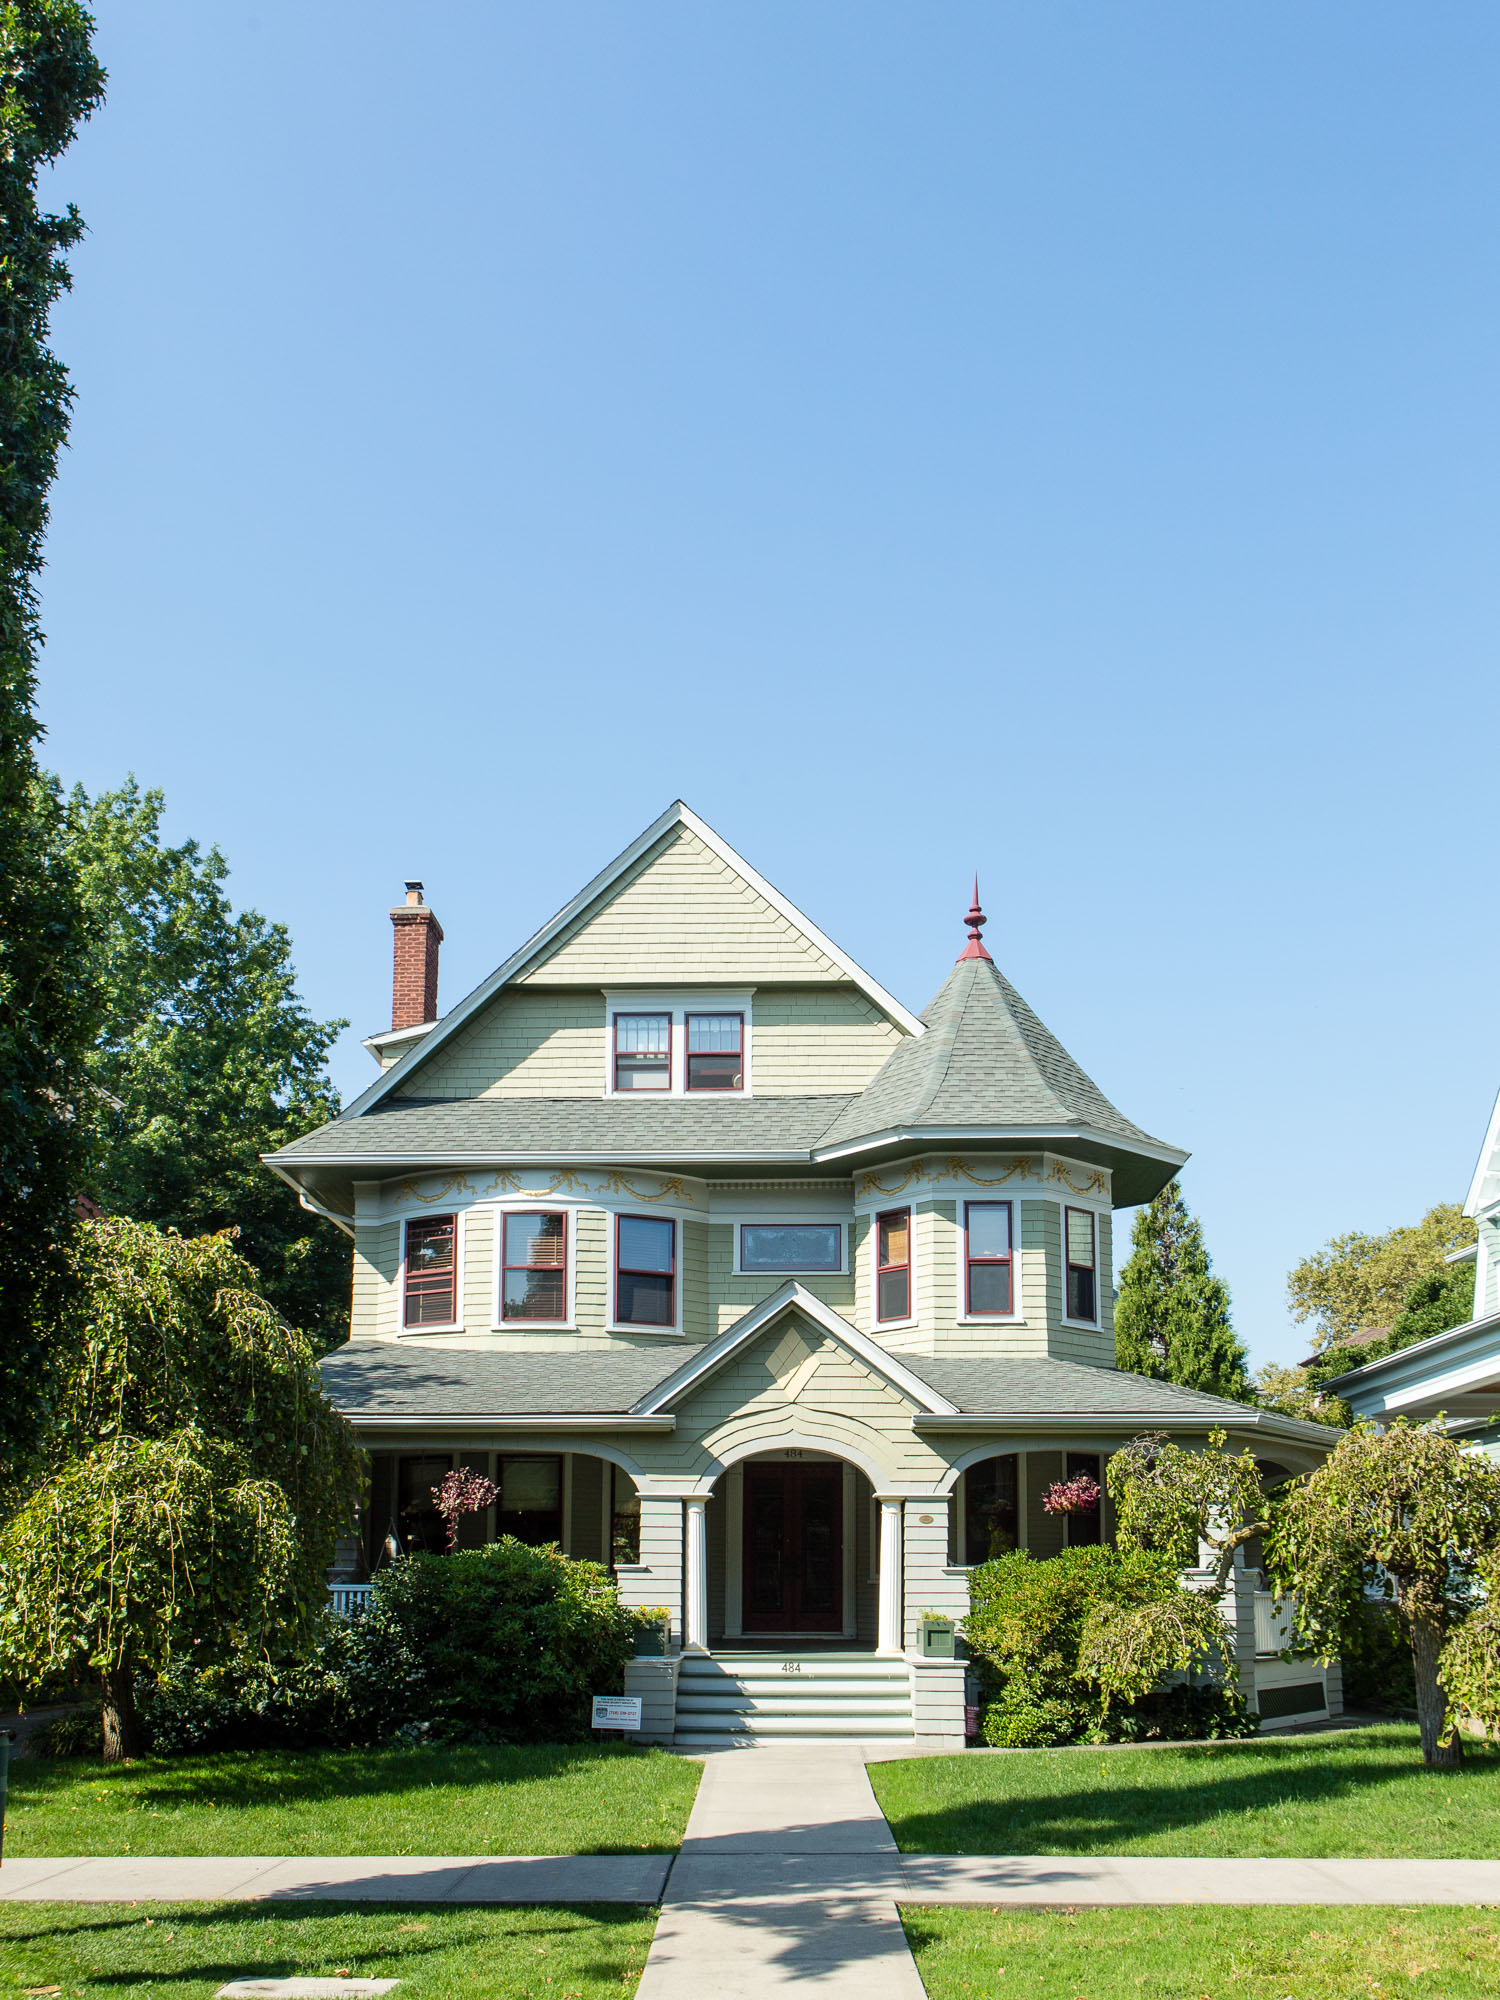 The former Thomas A. Radcliffe House at 484 E. 17th St., between Dorchester Road and Ditmas Ave., displays a blend of shingle-style Queen Anne and Colonial Revival architecture.